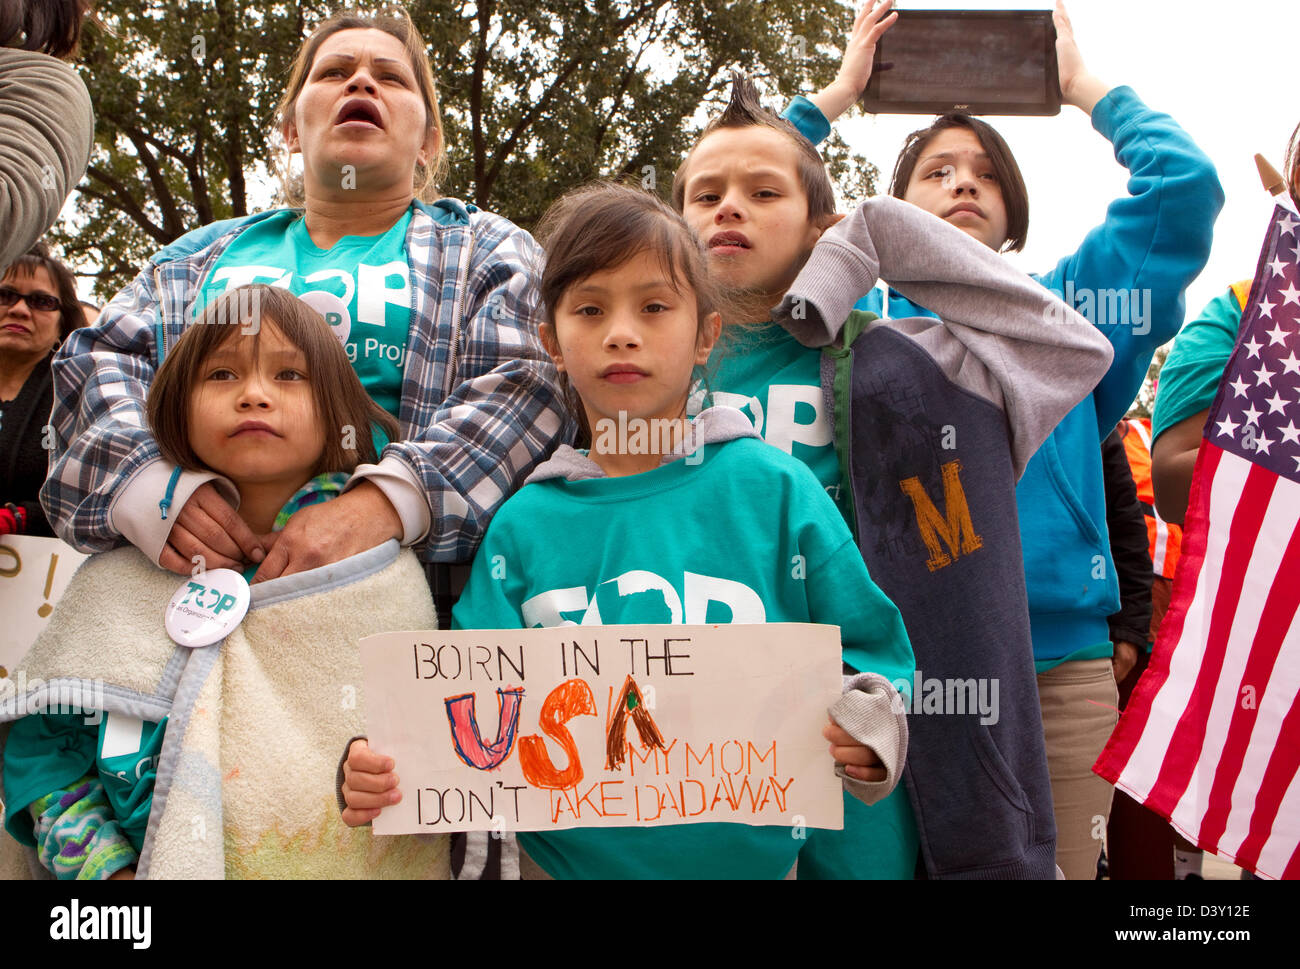 Hundreds including children, march to Texas Capitol building in Austin Texas to push for comprehensive immigration reform. Stock Photo